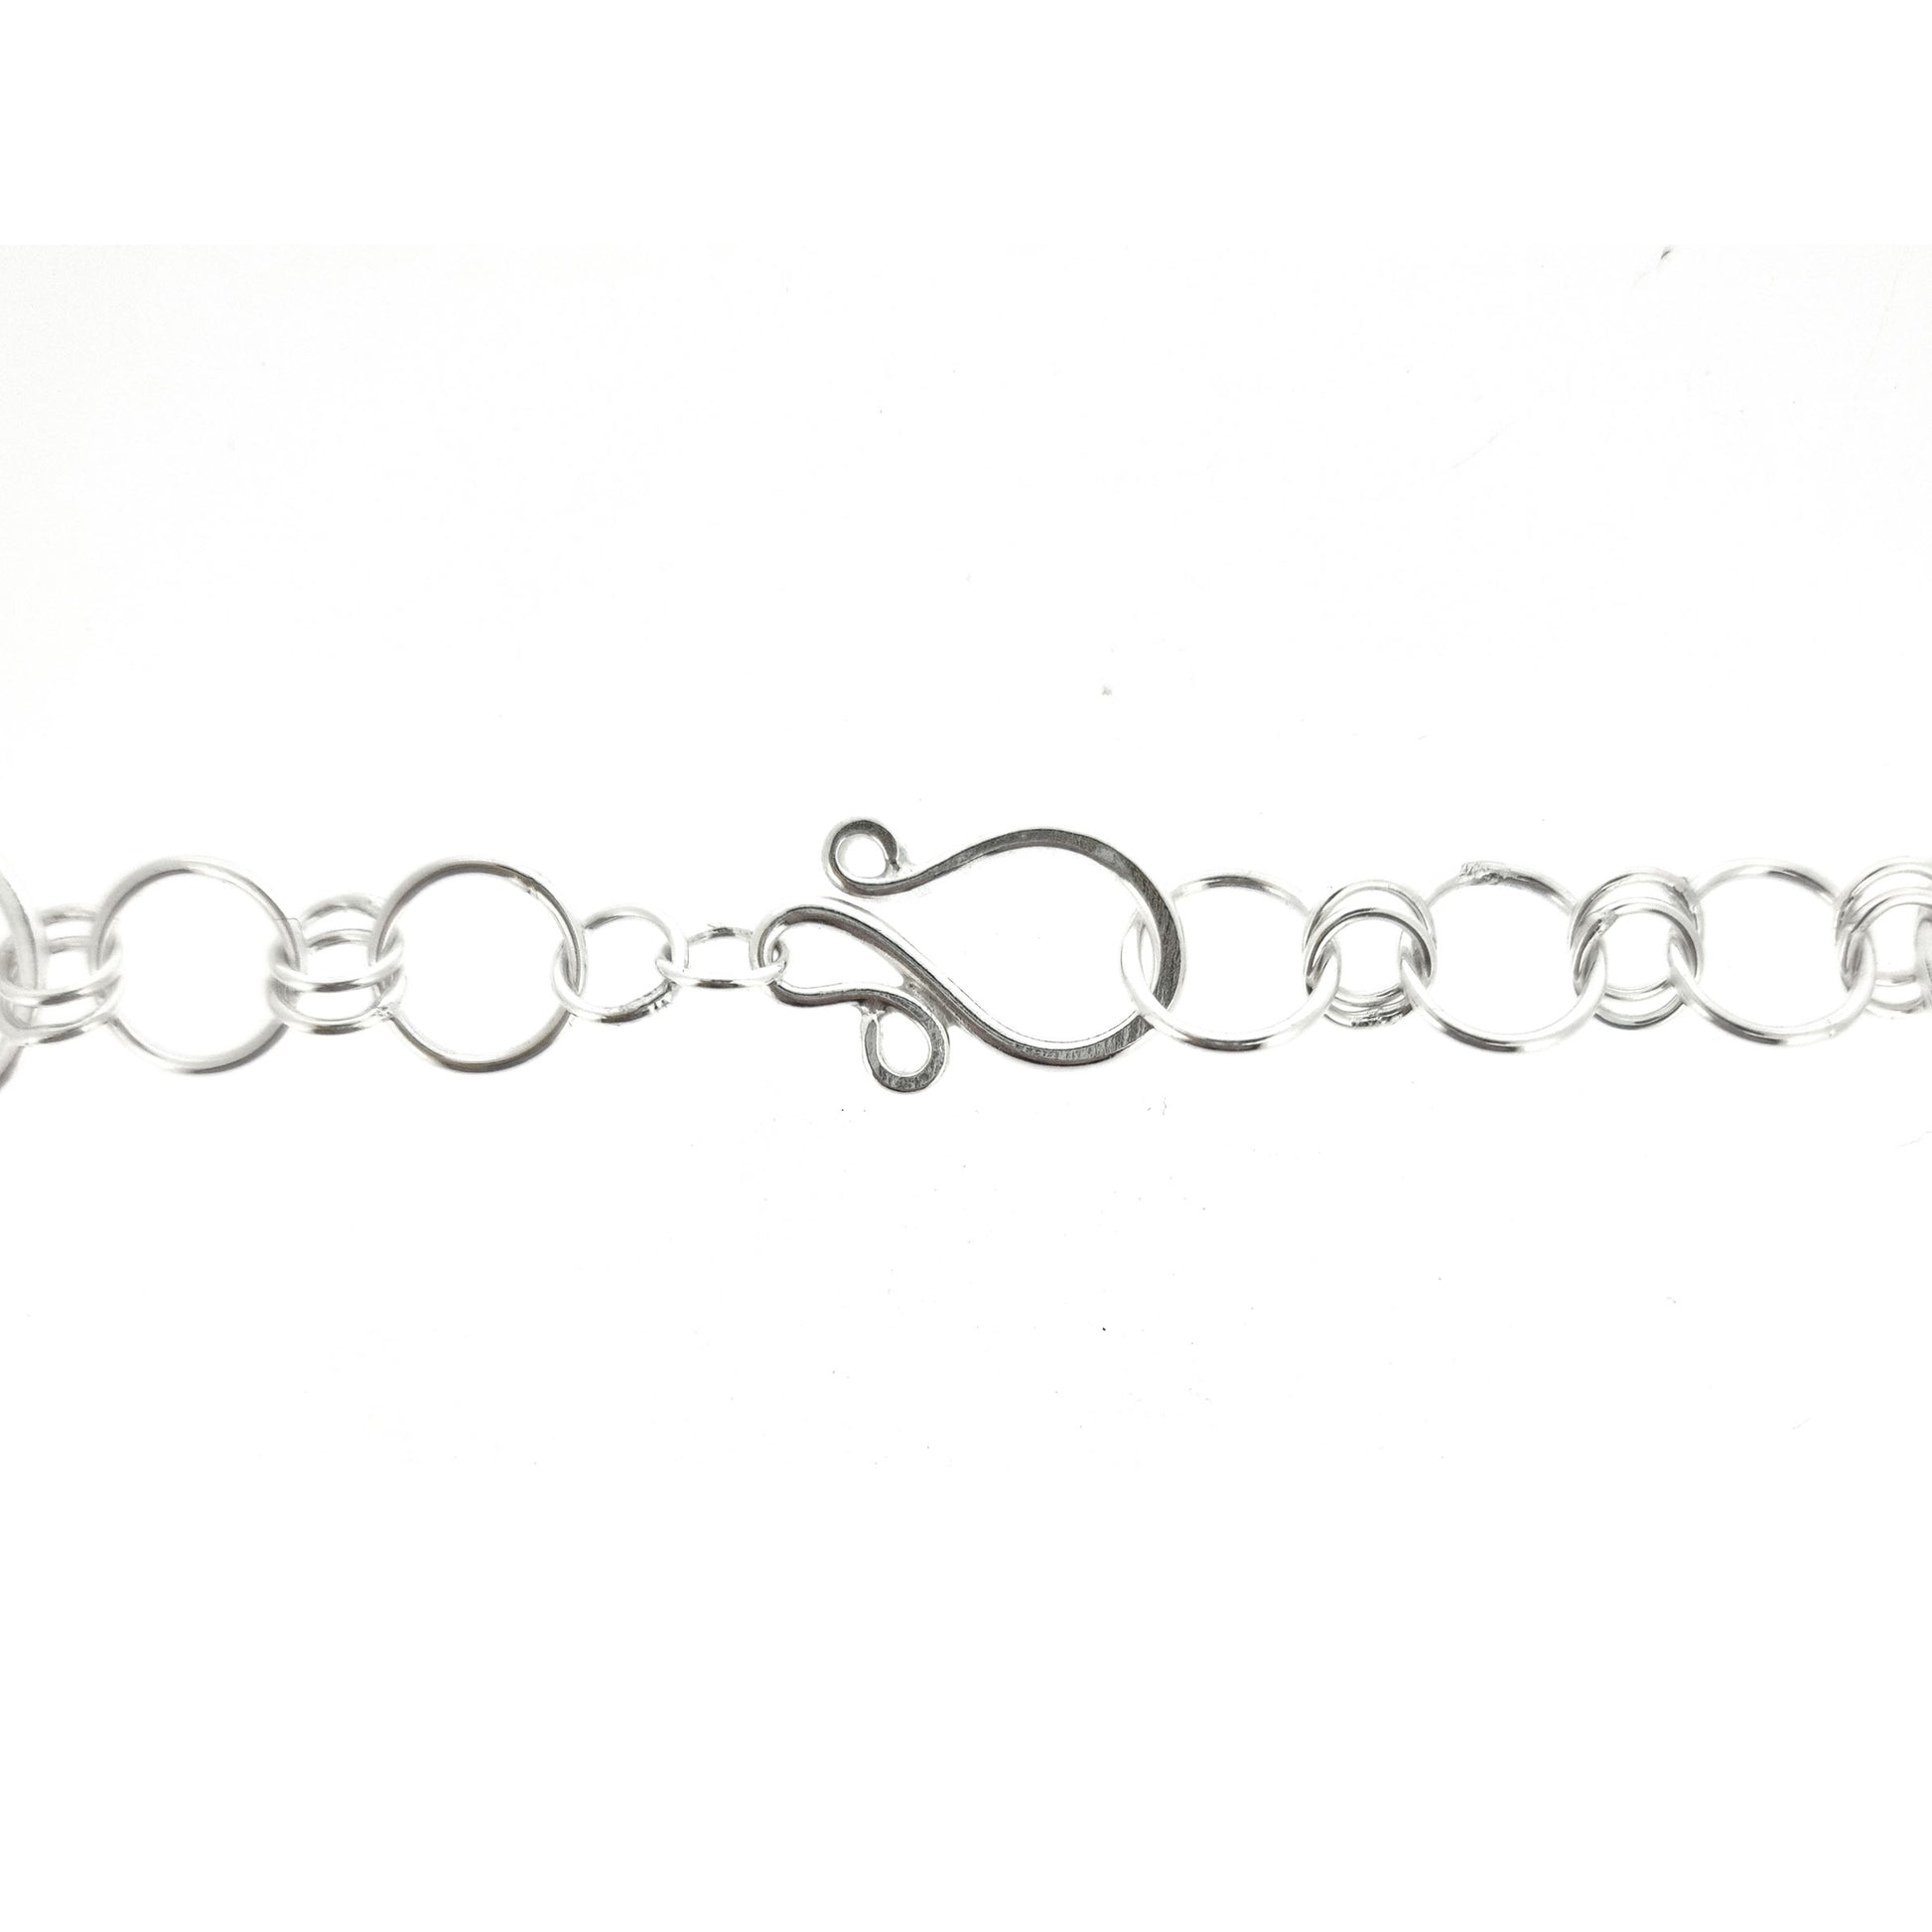 Silver chain with circular links and an s clasp.